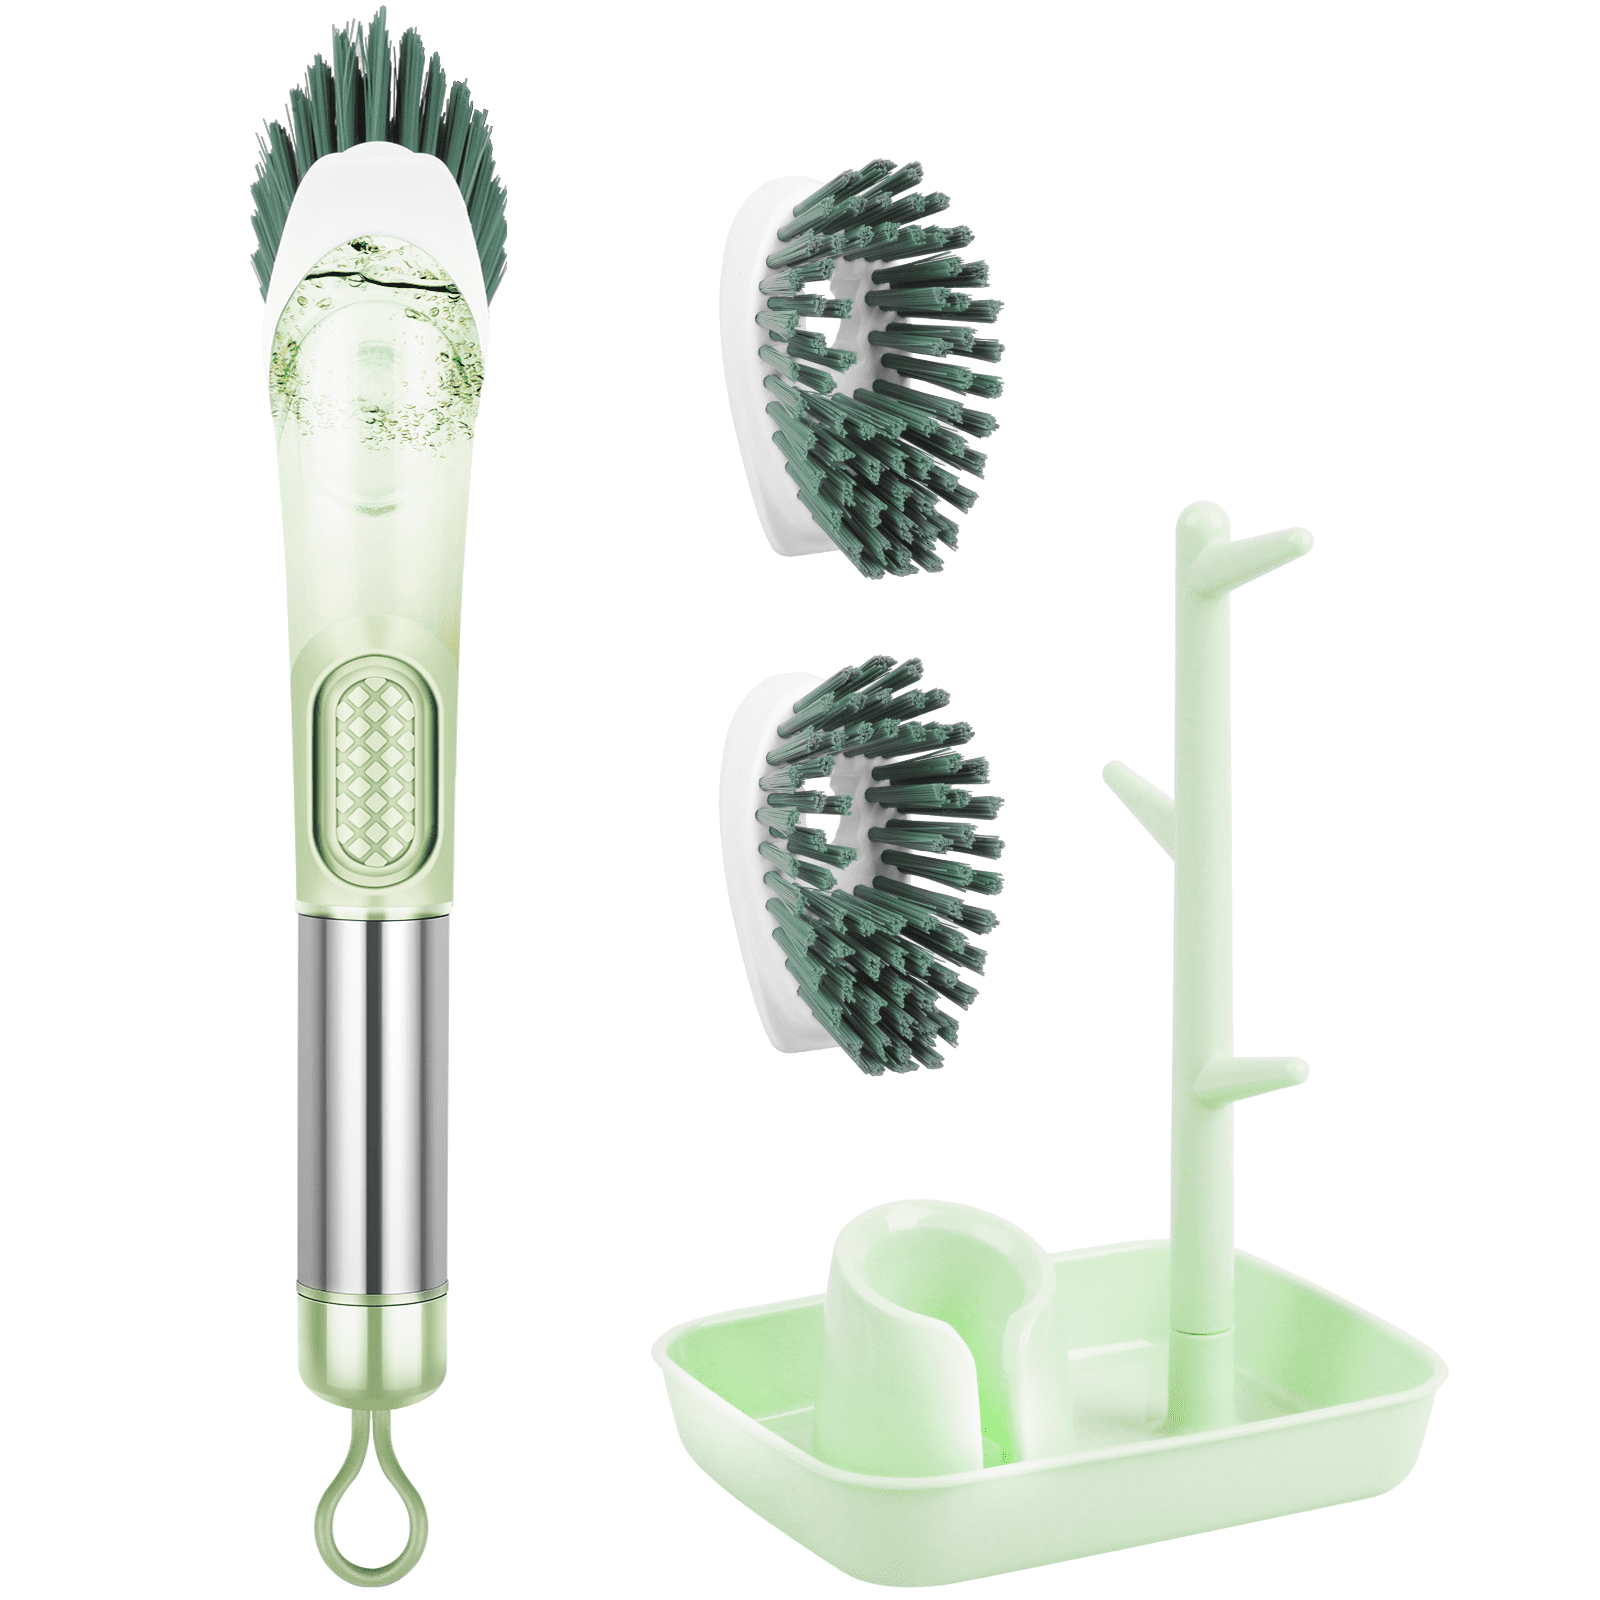 Portable Dish Cleaning Brush With Soap Dispenser and Stand - Green col –  Unyky